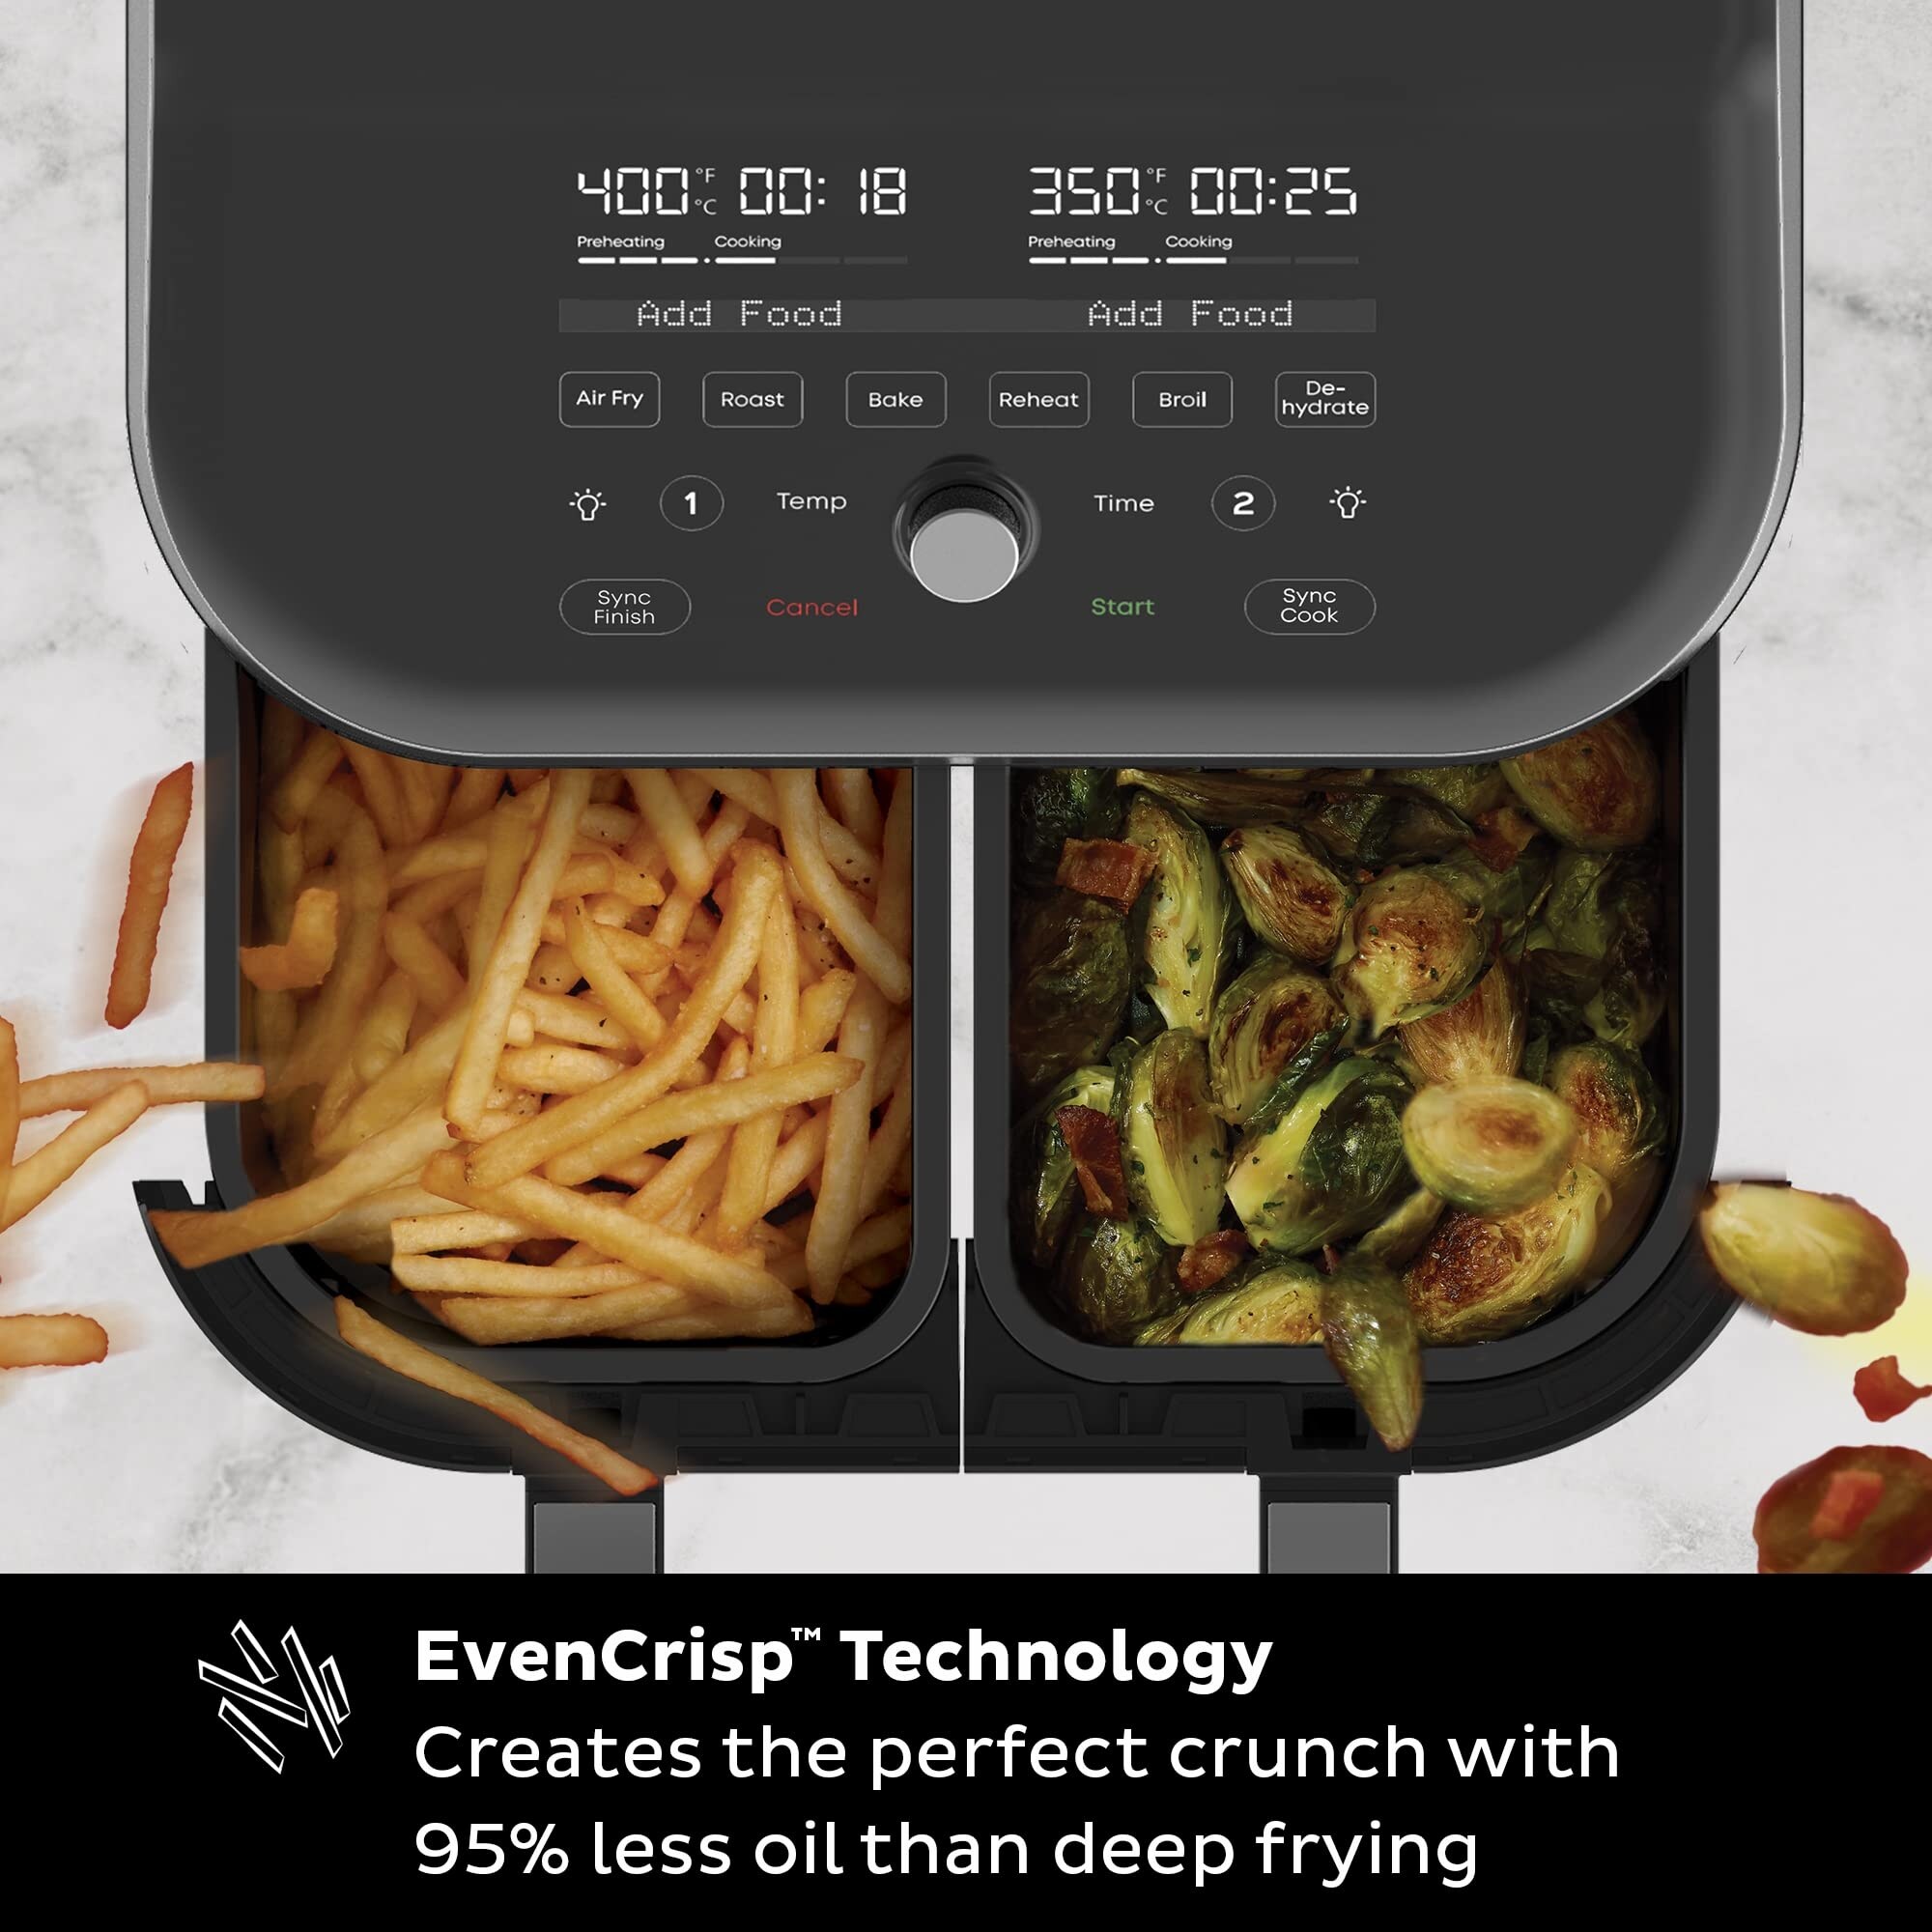 https://ak1.ostkcdn.com/images/products/is/images/direct/3087c4cc9b911e80b9e6caa30fd535afe741be13/XL-8-QT-Dual-Basket-Air-Fryer-Oven%2C-2-Independent-Baskets%2CClear-Cooking-Window%2C-App-with-over-100-Recipes%2CStainless-Steel.jpg